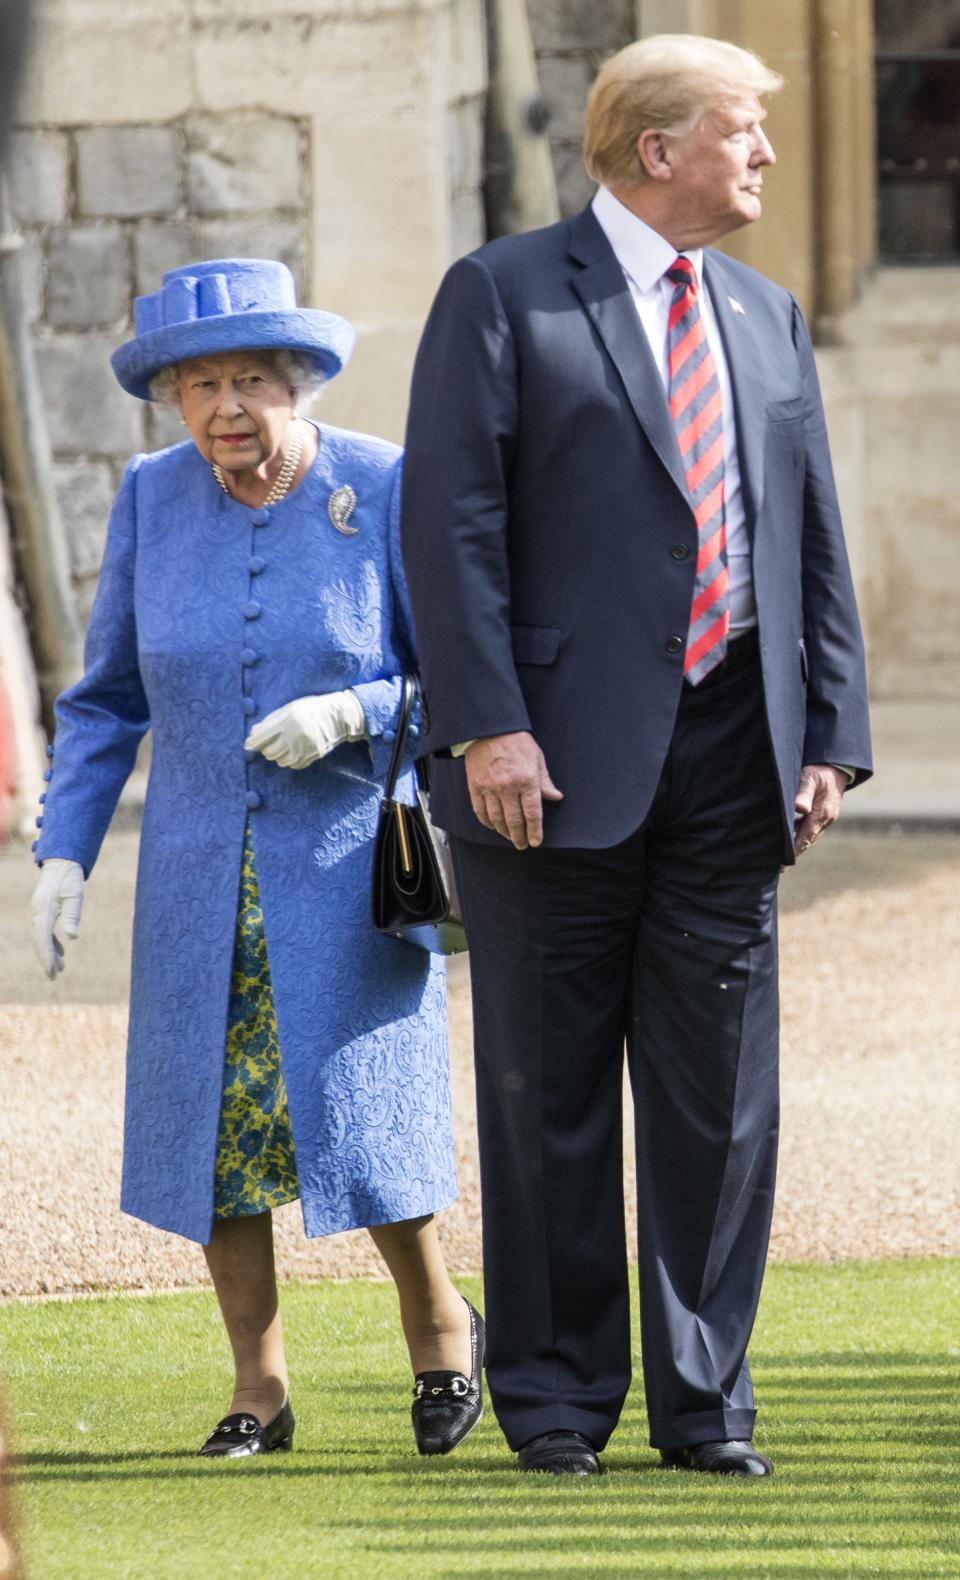 <h1 class="title">Trump And Queen Elizabeth II 2</h1><cite class="credit">WPA Pool/Getty Images</cite>